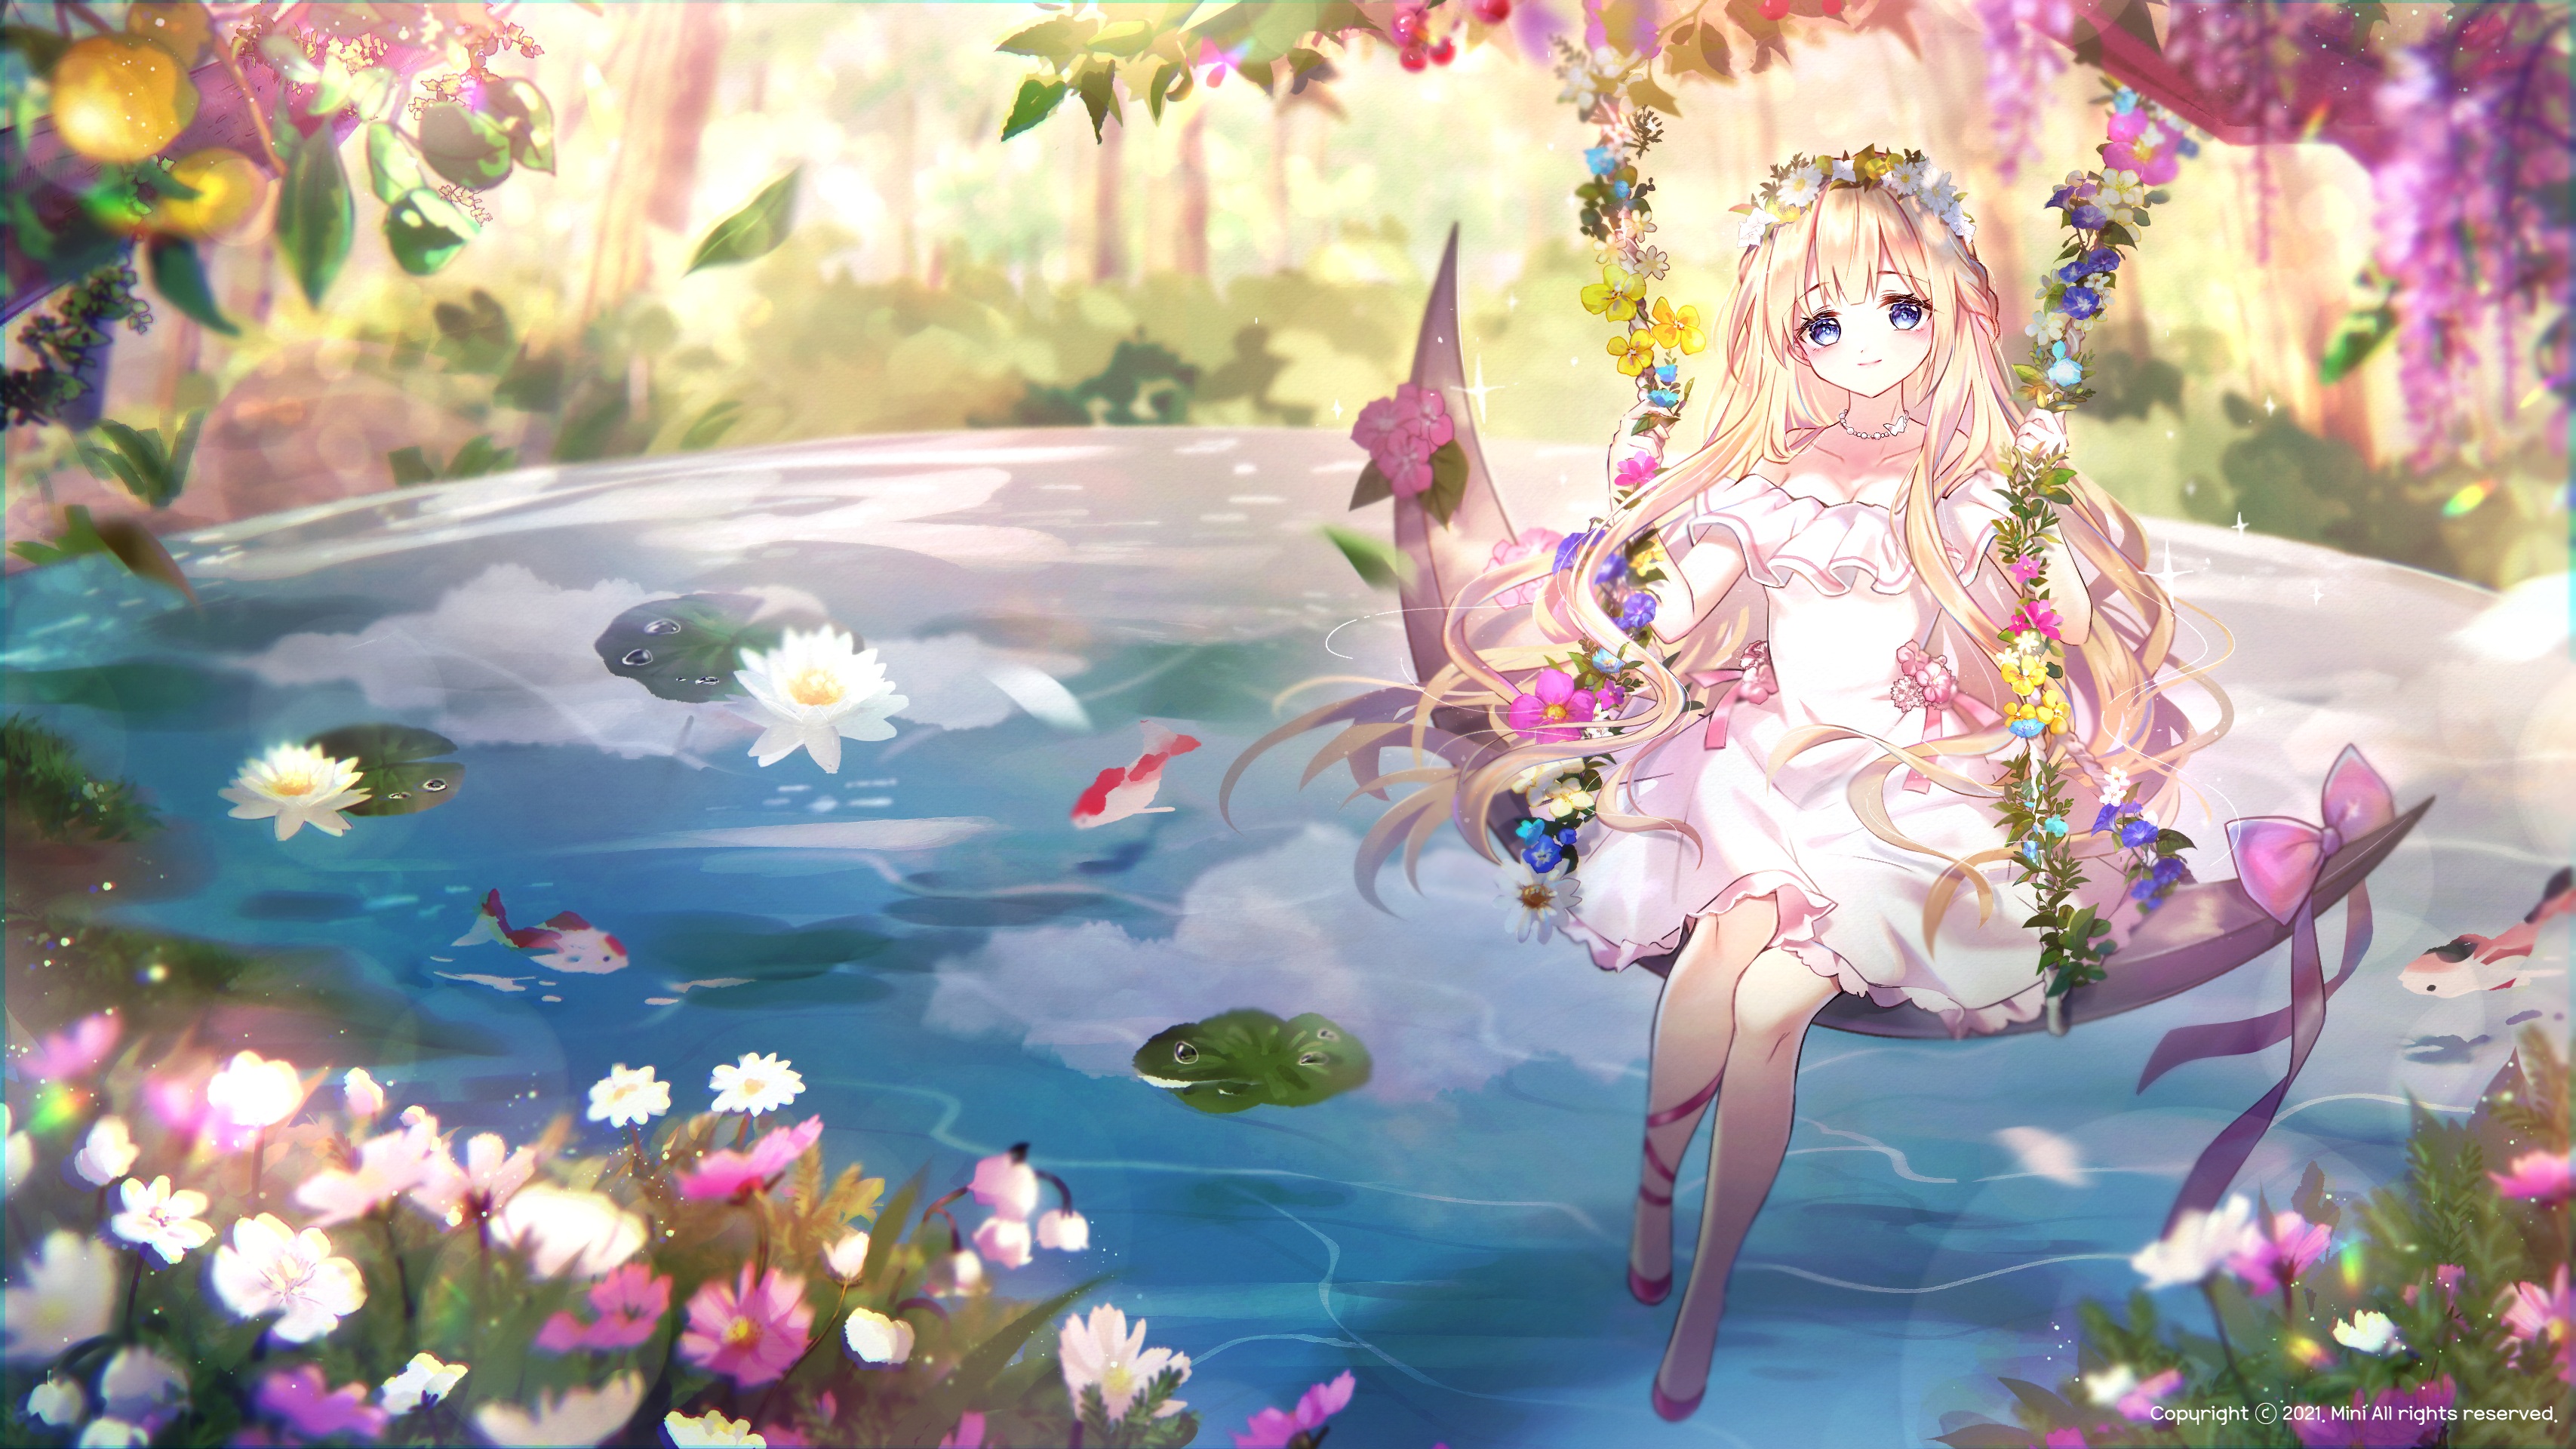 Anime 3414x1920 anime anime girls fantasy art fantasy girl swings knees together pond long hair flowers plants looking at viewer women outdoors nature dress blonde